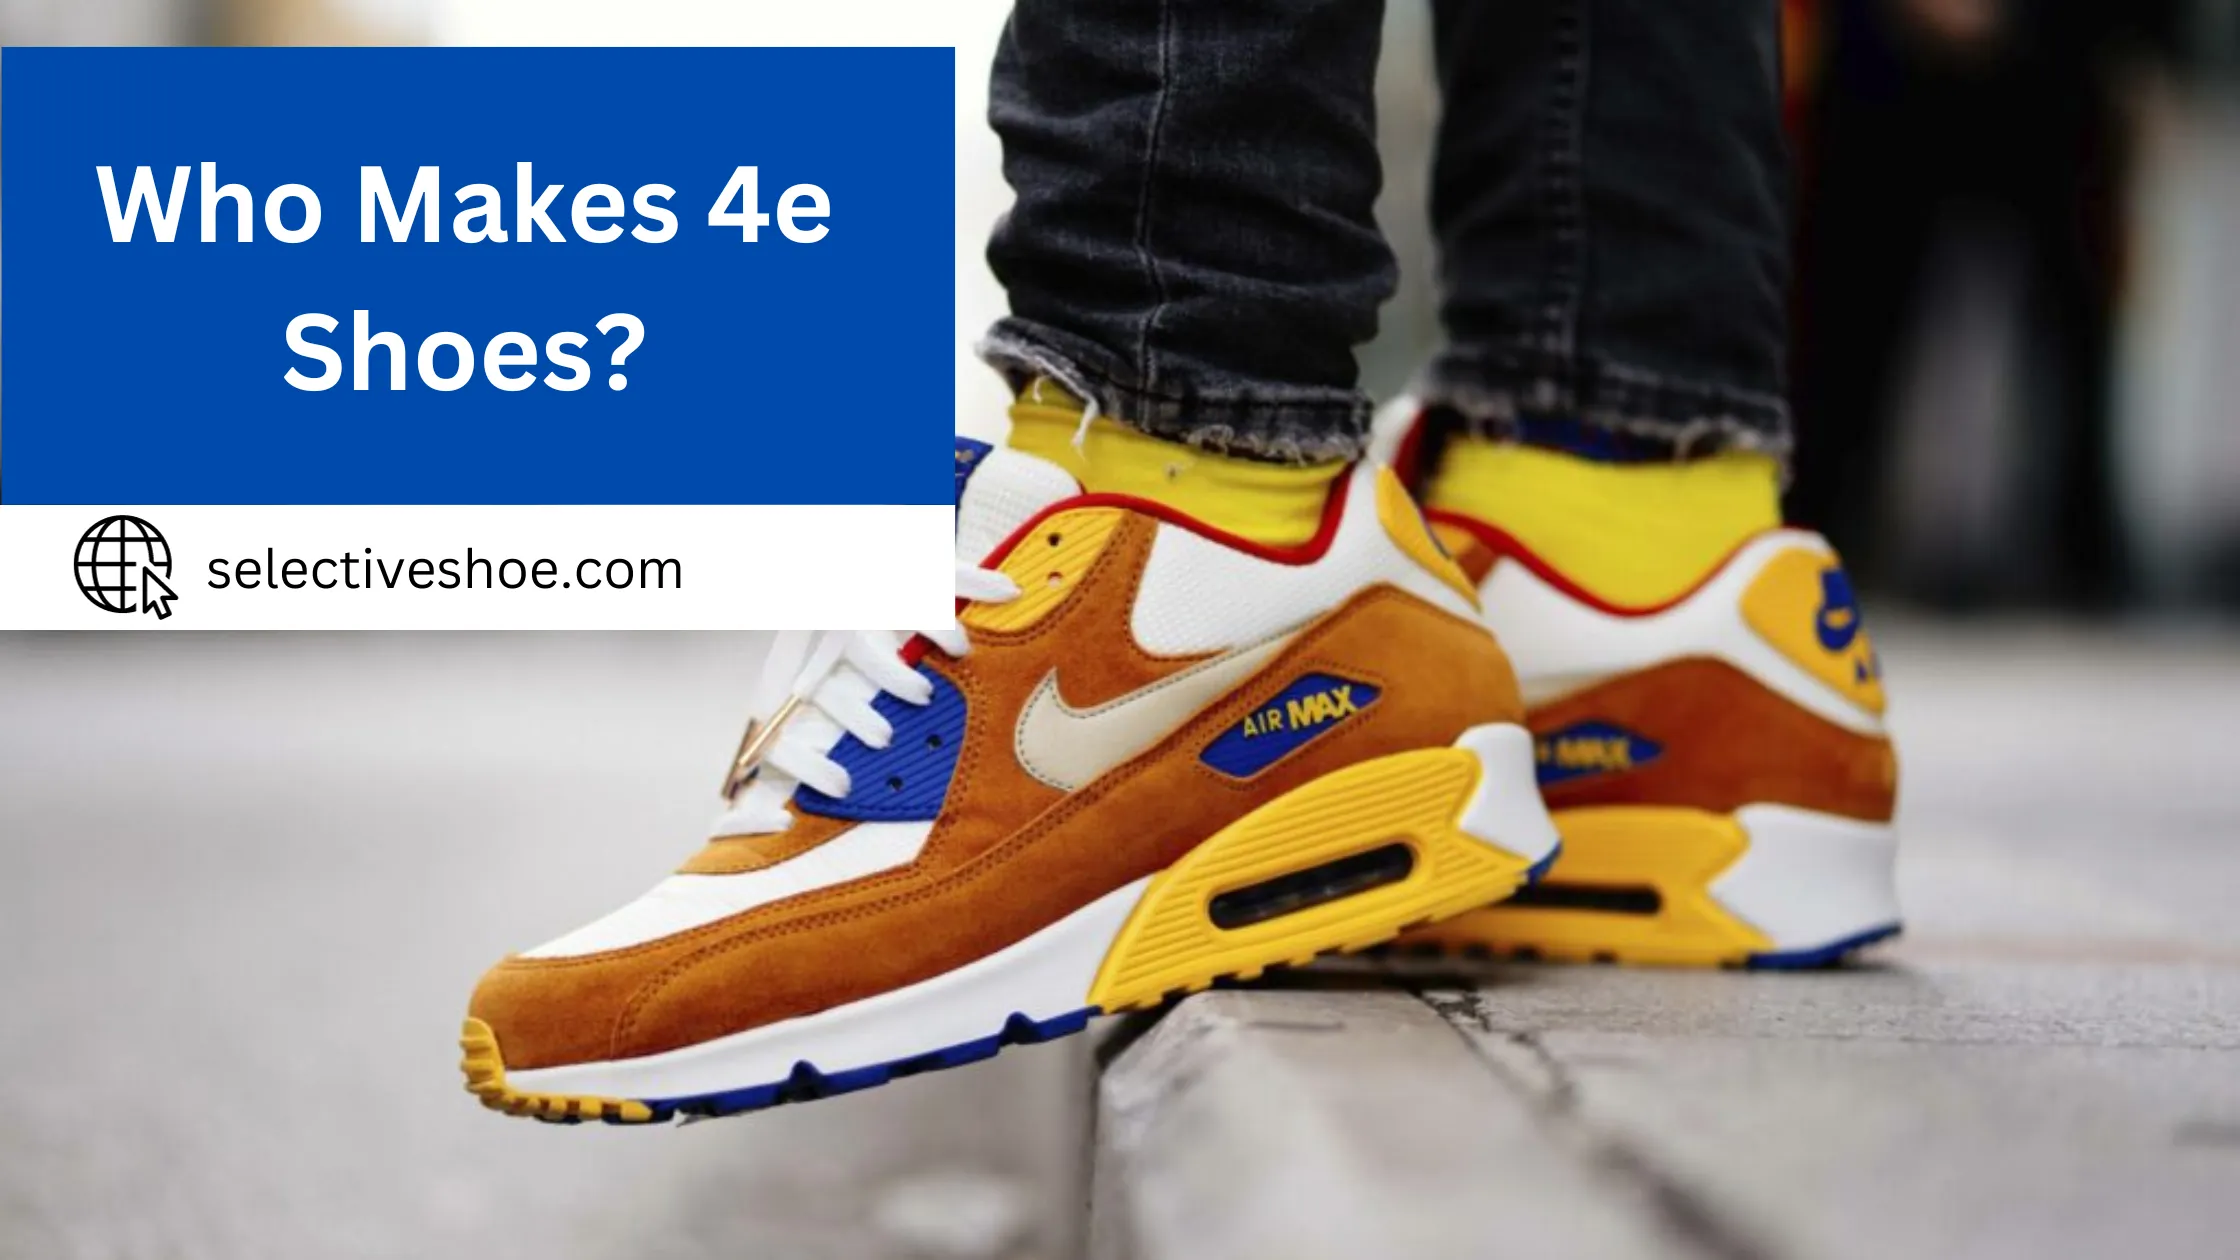 Who Makes 4e Shoes? You Should Need To Know